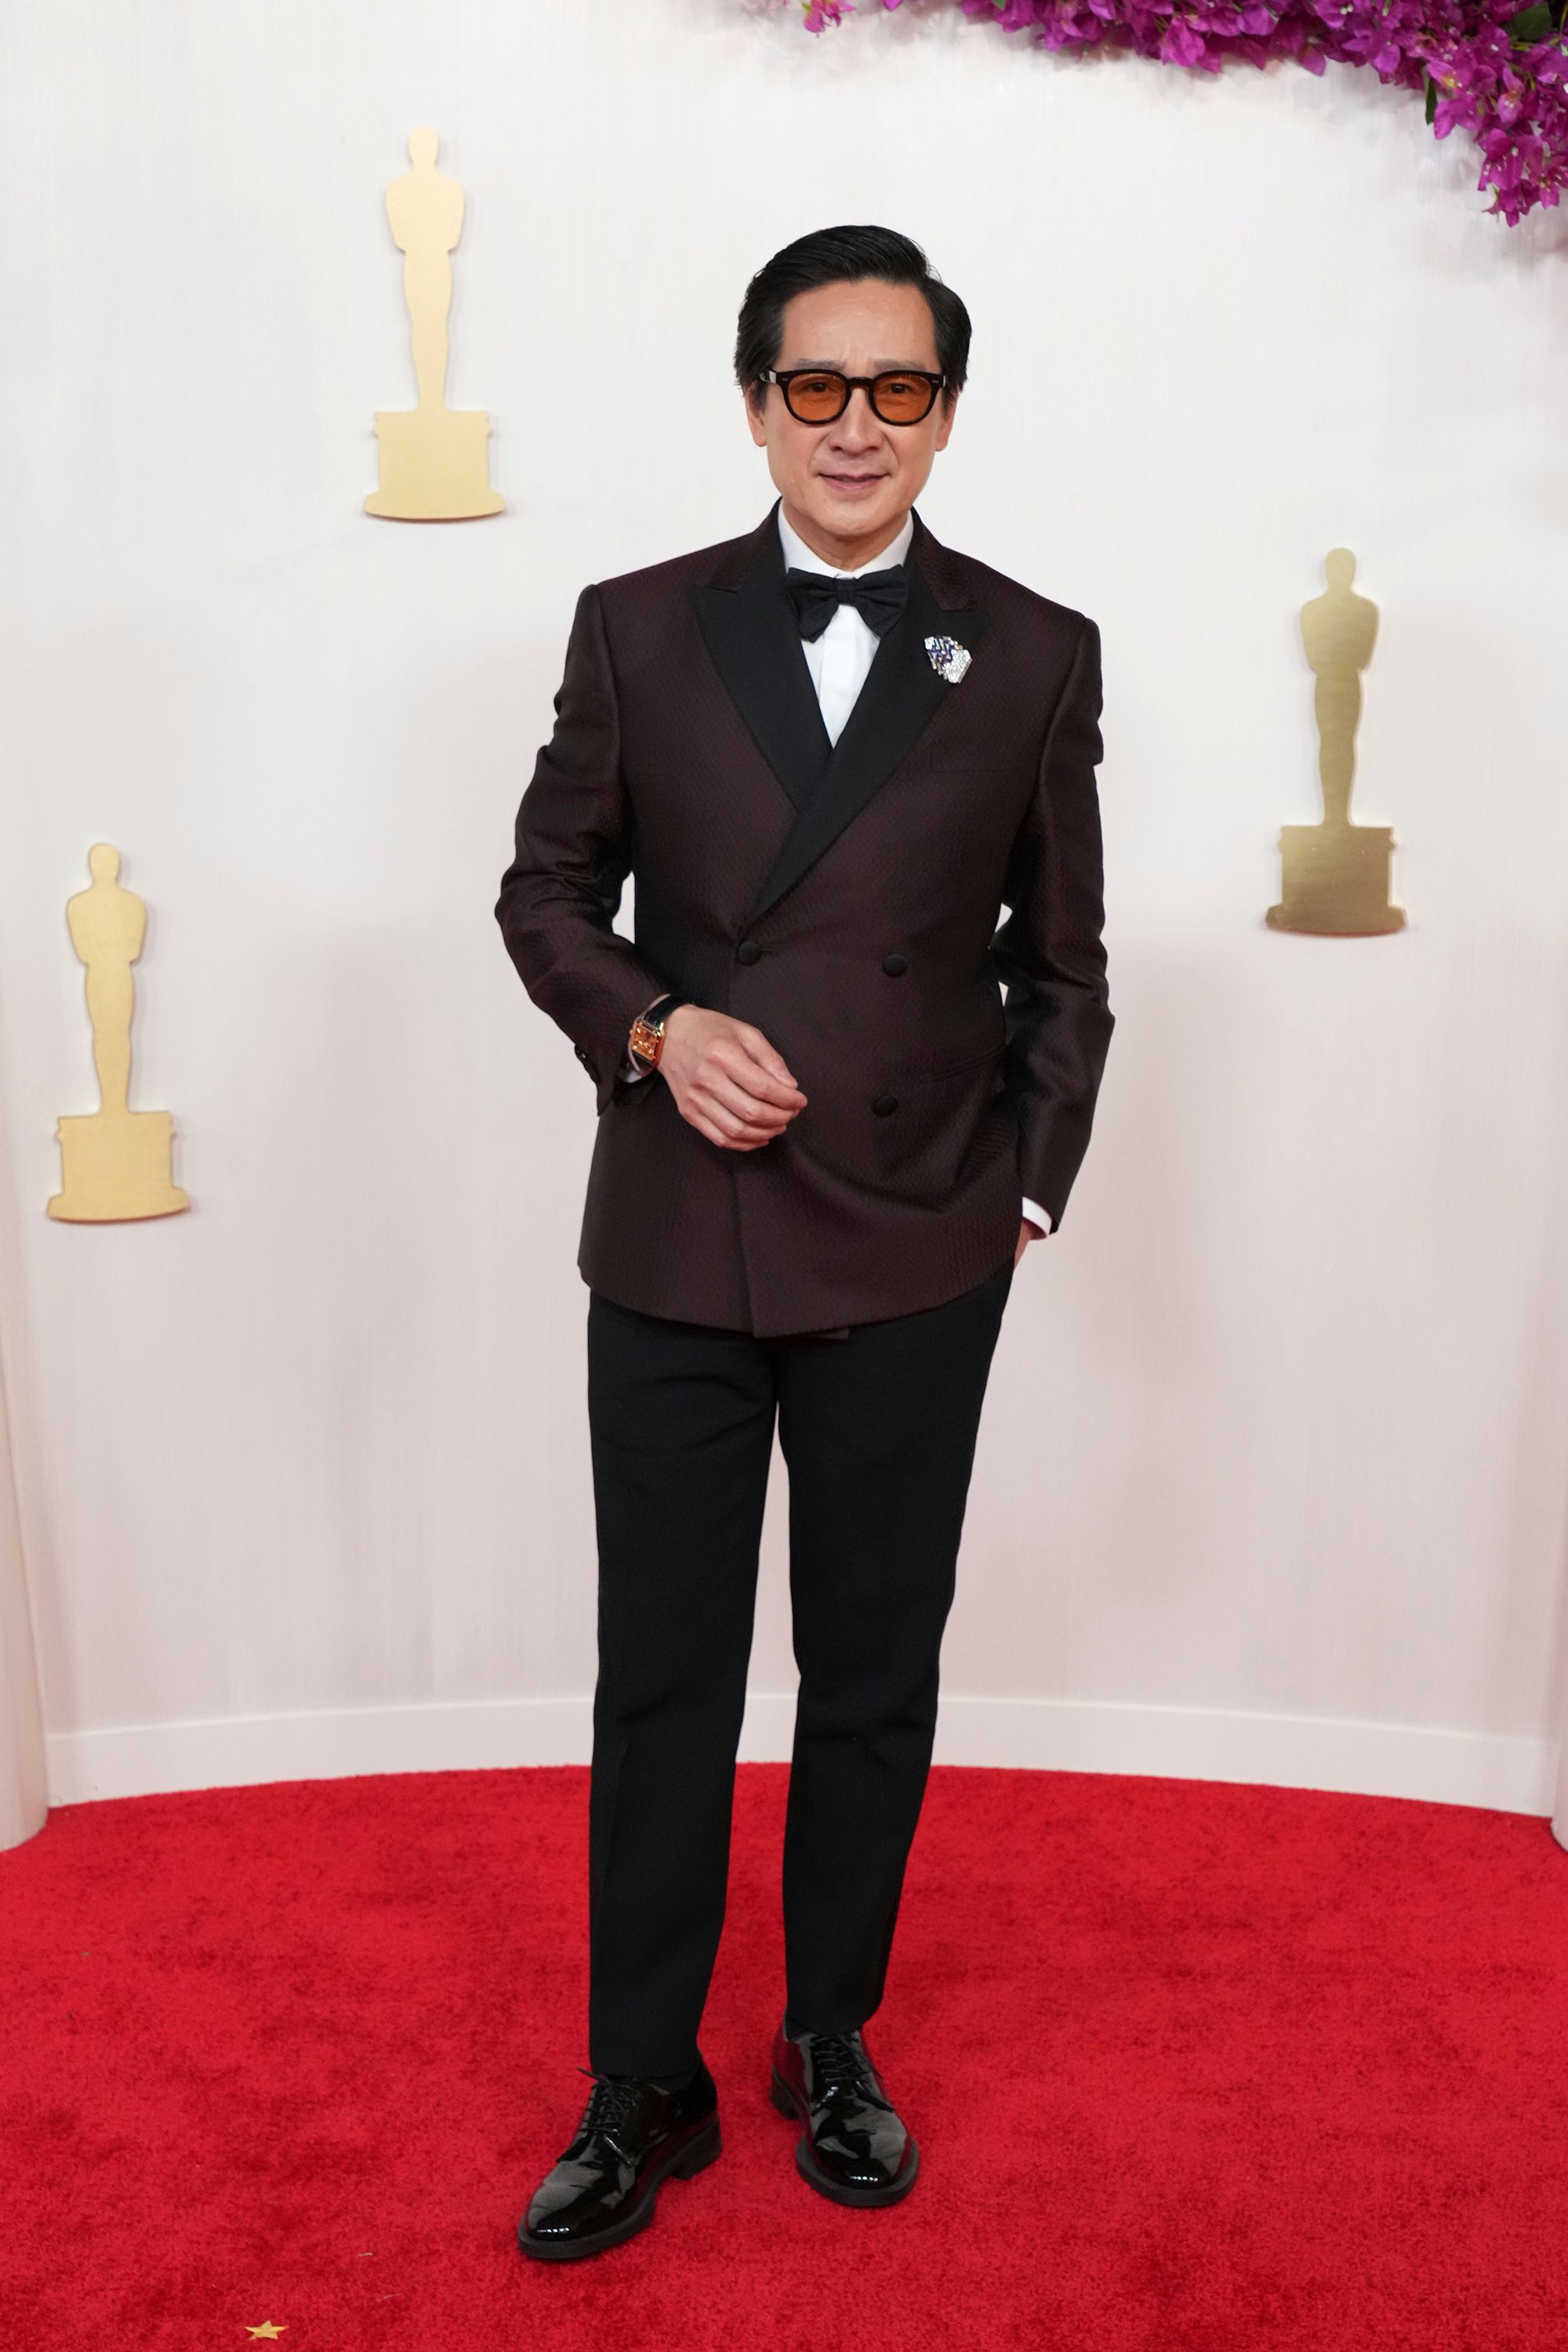 Ke Huy Quan wore a deep red double-breasted Giorgio Armani suit accented with amber shades.